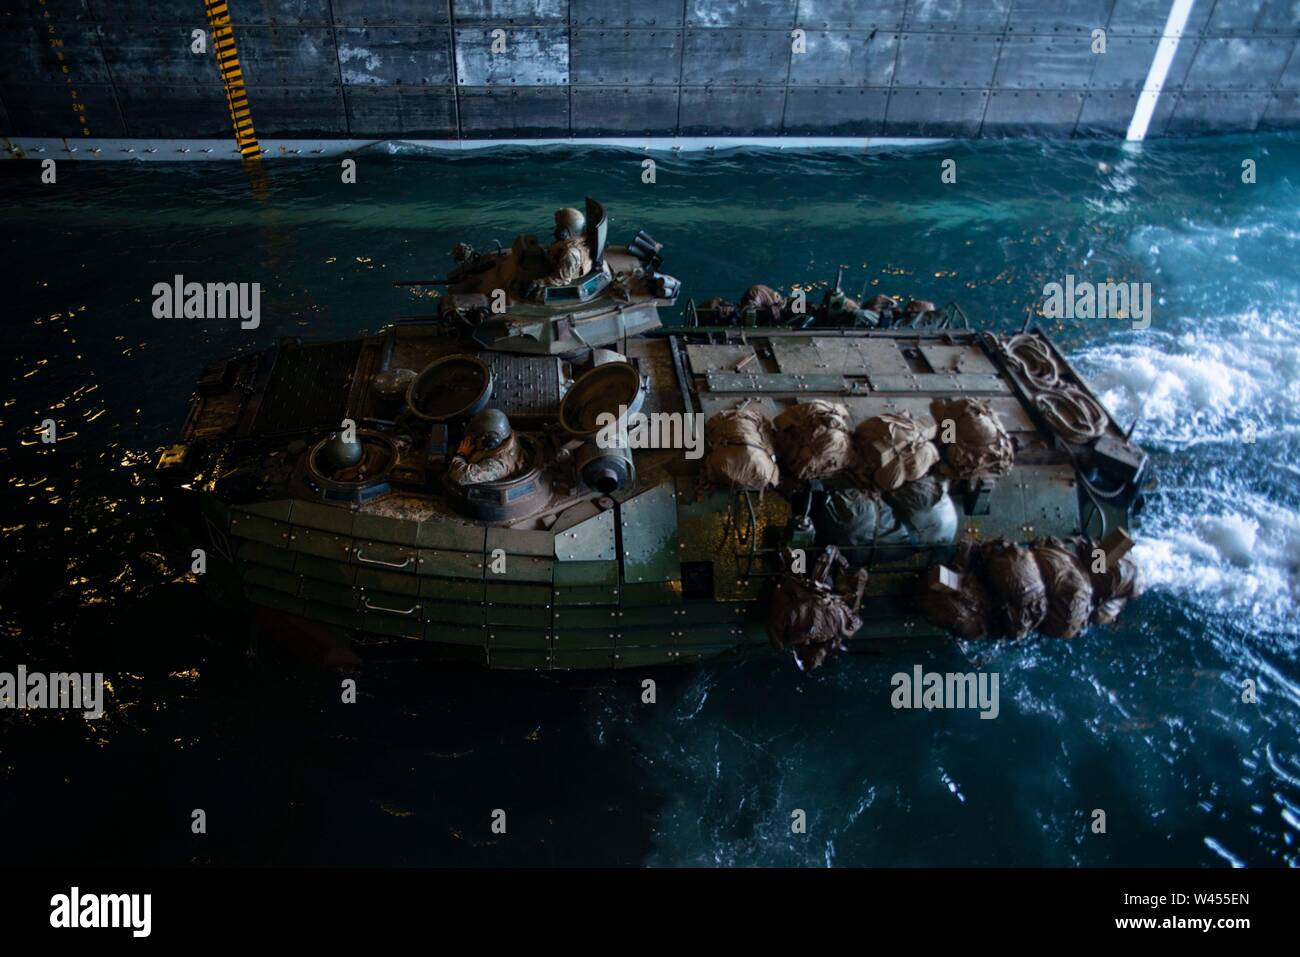 190718-N-DX072-1214 STANAGE BAY, Australia (July 18, 2019) An assault amphibious vehicle (AAV), assigned to the 31st Marine Expeditionary Unit (MEU), transits through the well deck of the amphibious transport dock ship USS Green Bay (LPD 20). Green Bay, part of the Wasp Expeditionary Strike Group, with embarked 31st MEU, is currently participating in Talisman Sabre 2019 off the coast of Northern Australia. A bilateral, biennial event, Talisman Sabre is designed to improve U.S. and Australian combat training, readiness and interoperability through realistic, relevant training necessary to maint Stock Photo